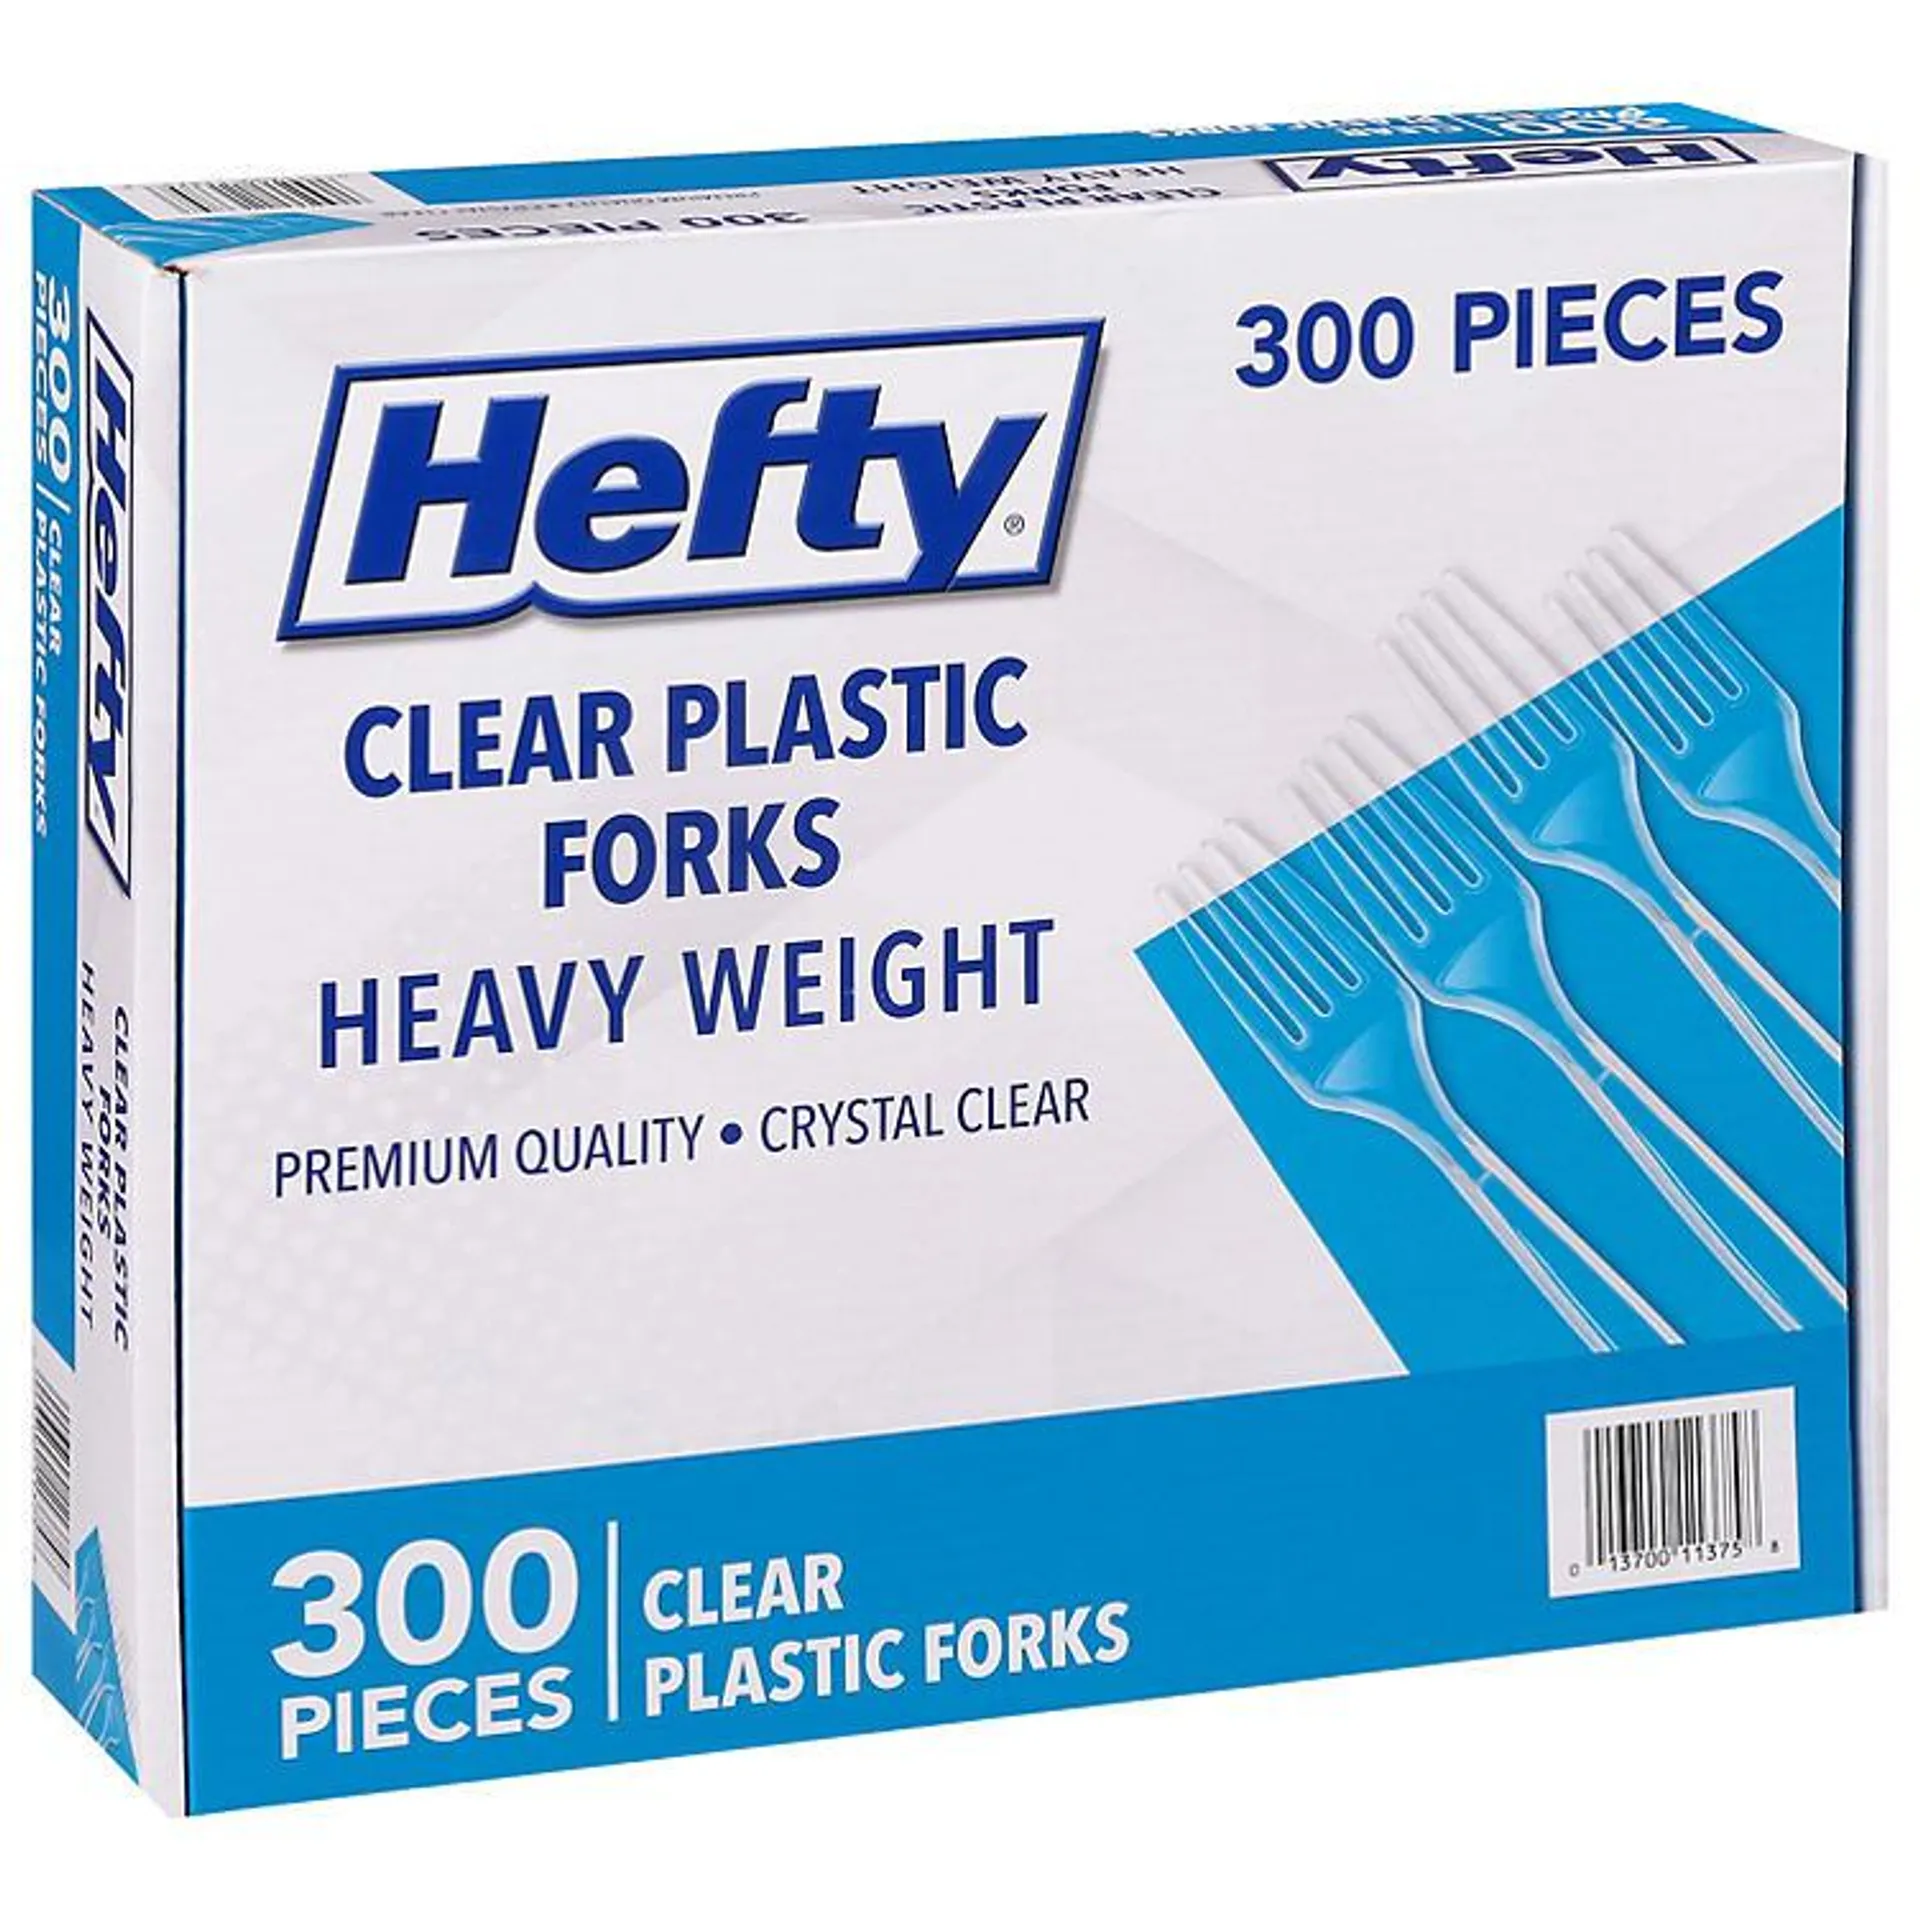 Hefty Clear Heavy Weight Plastic Forks (300 ct.)